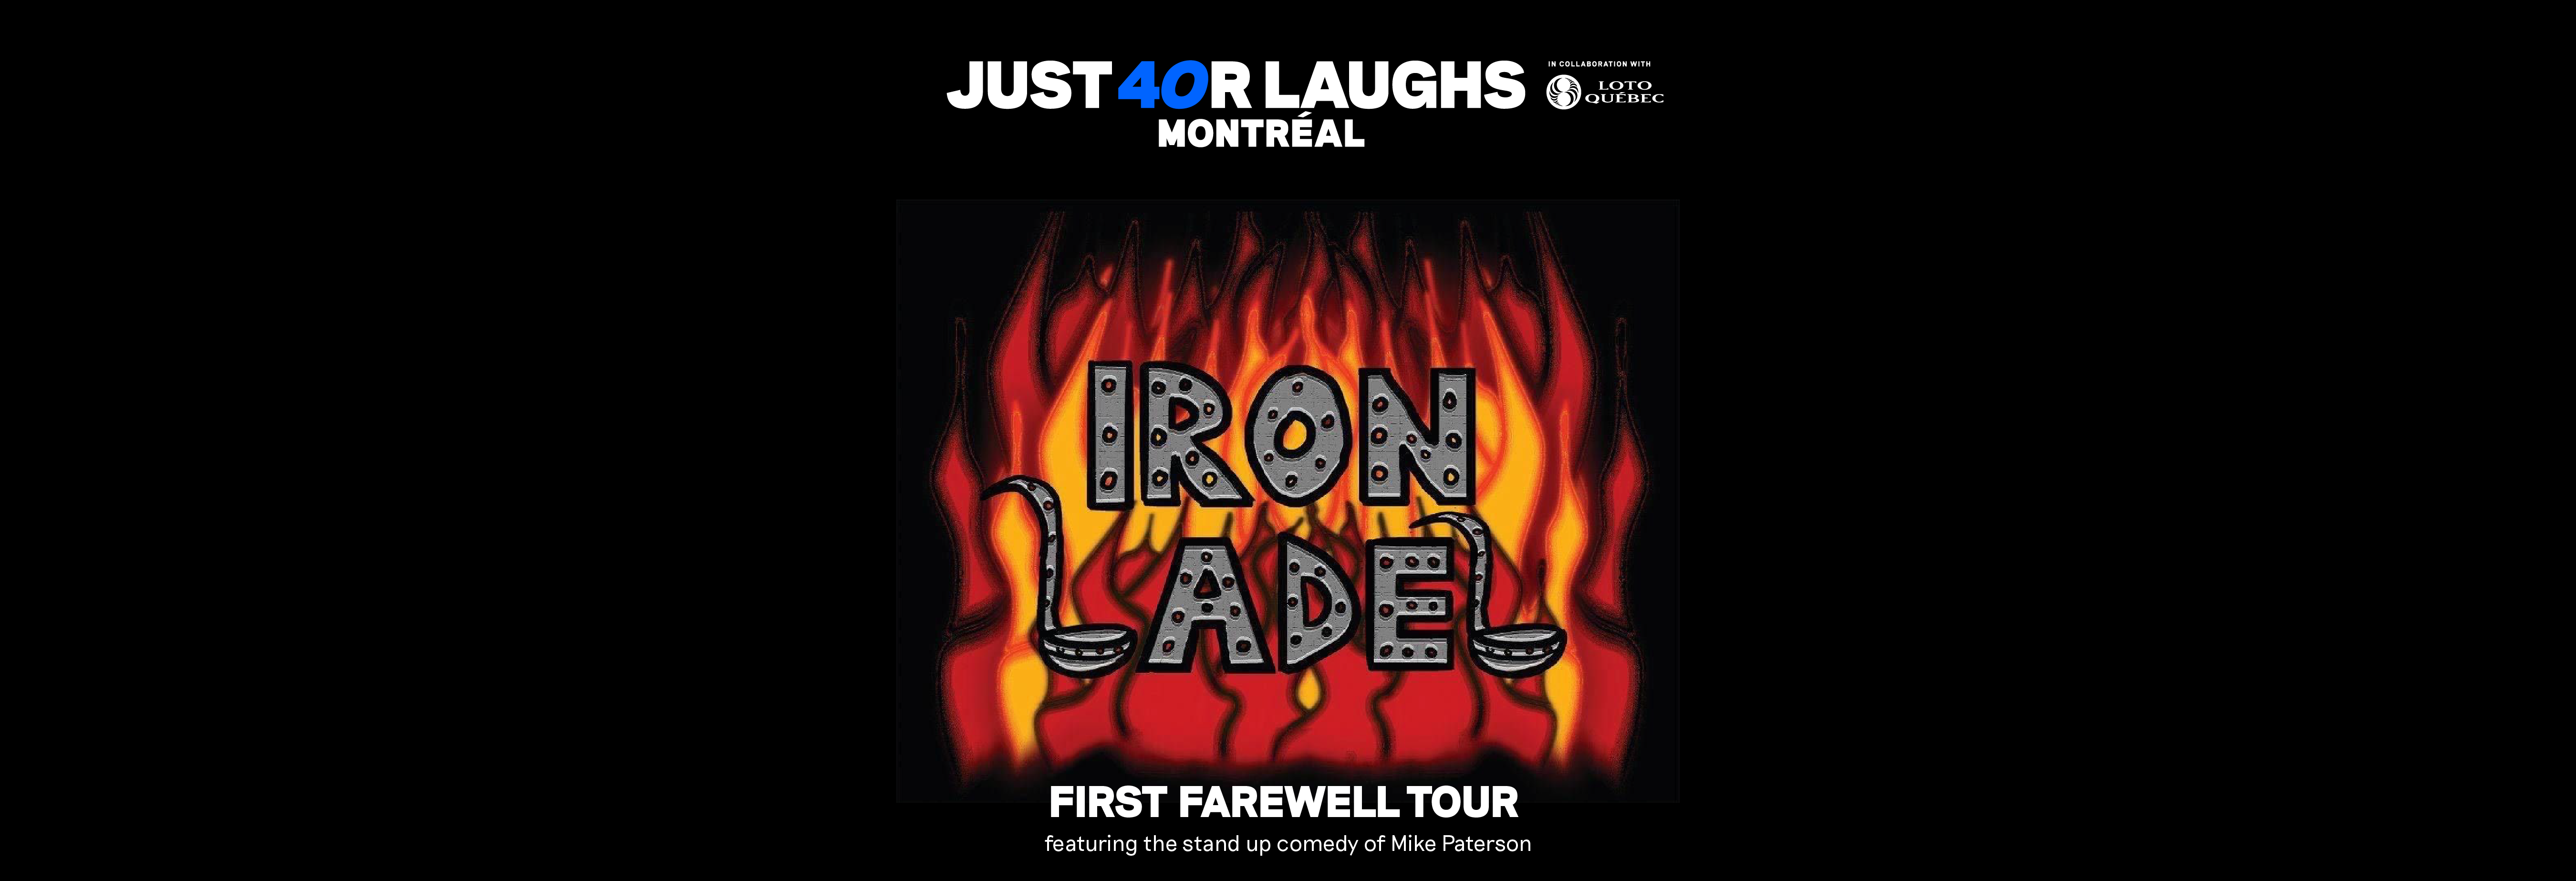 Iron Ladel’s First Farewell Tour 